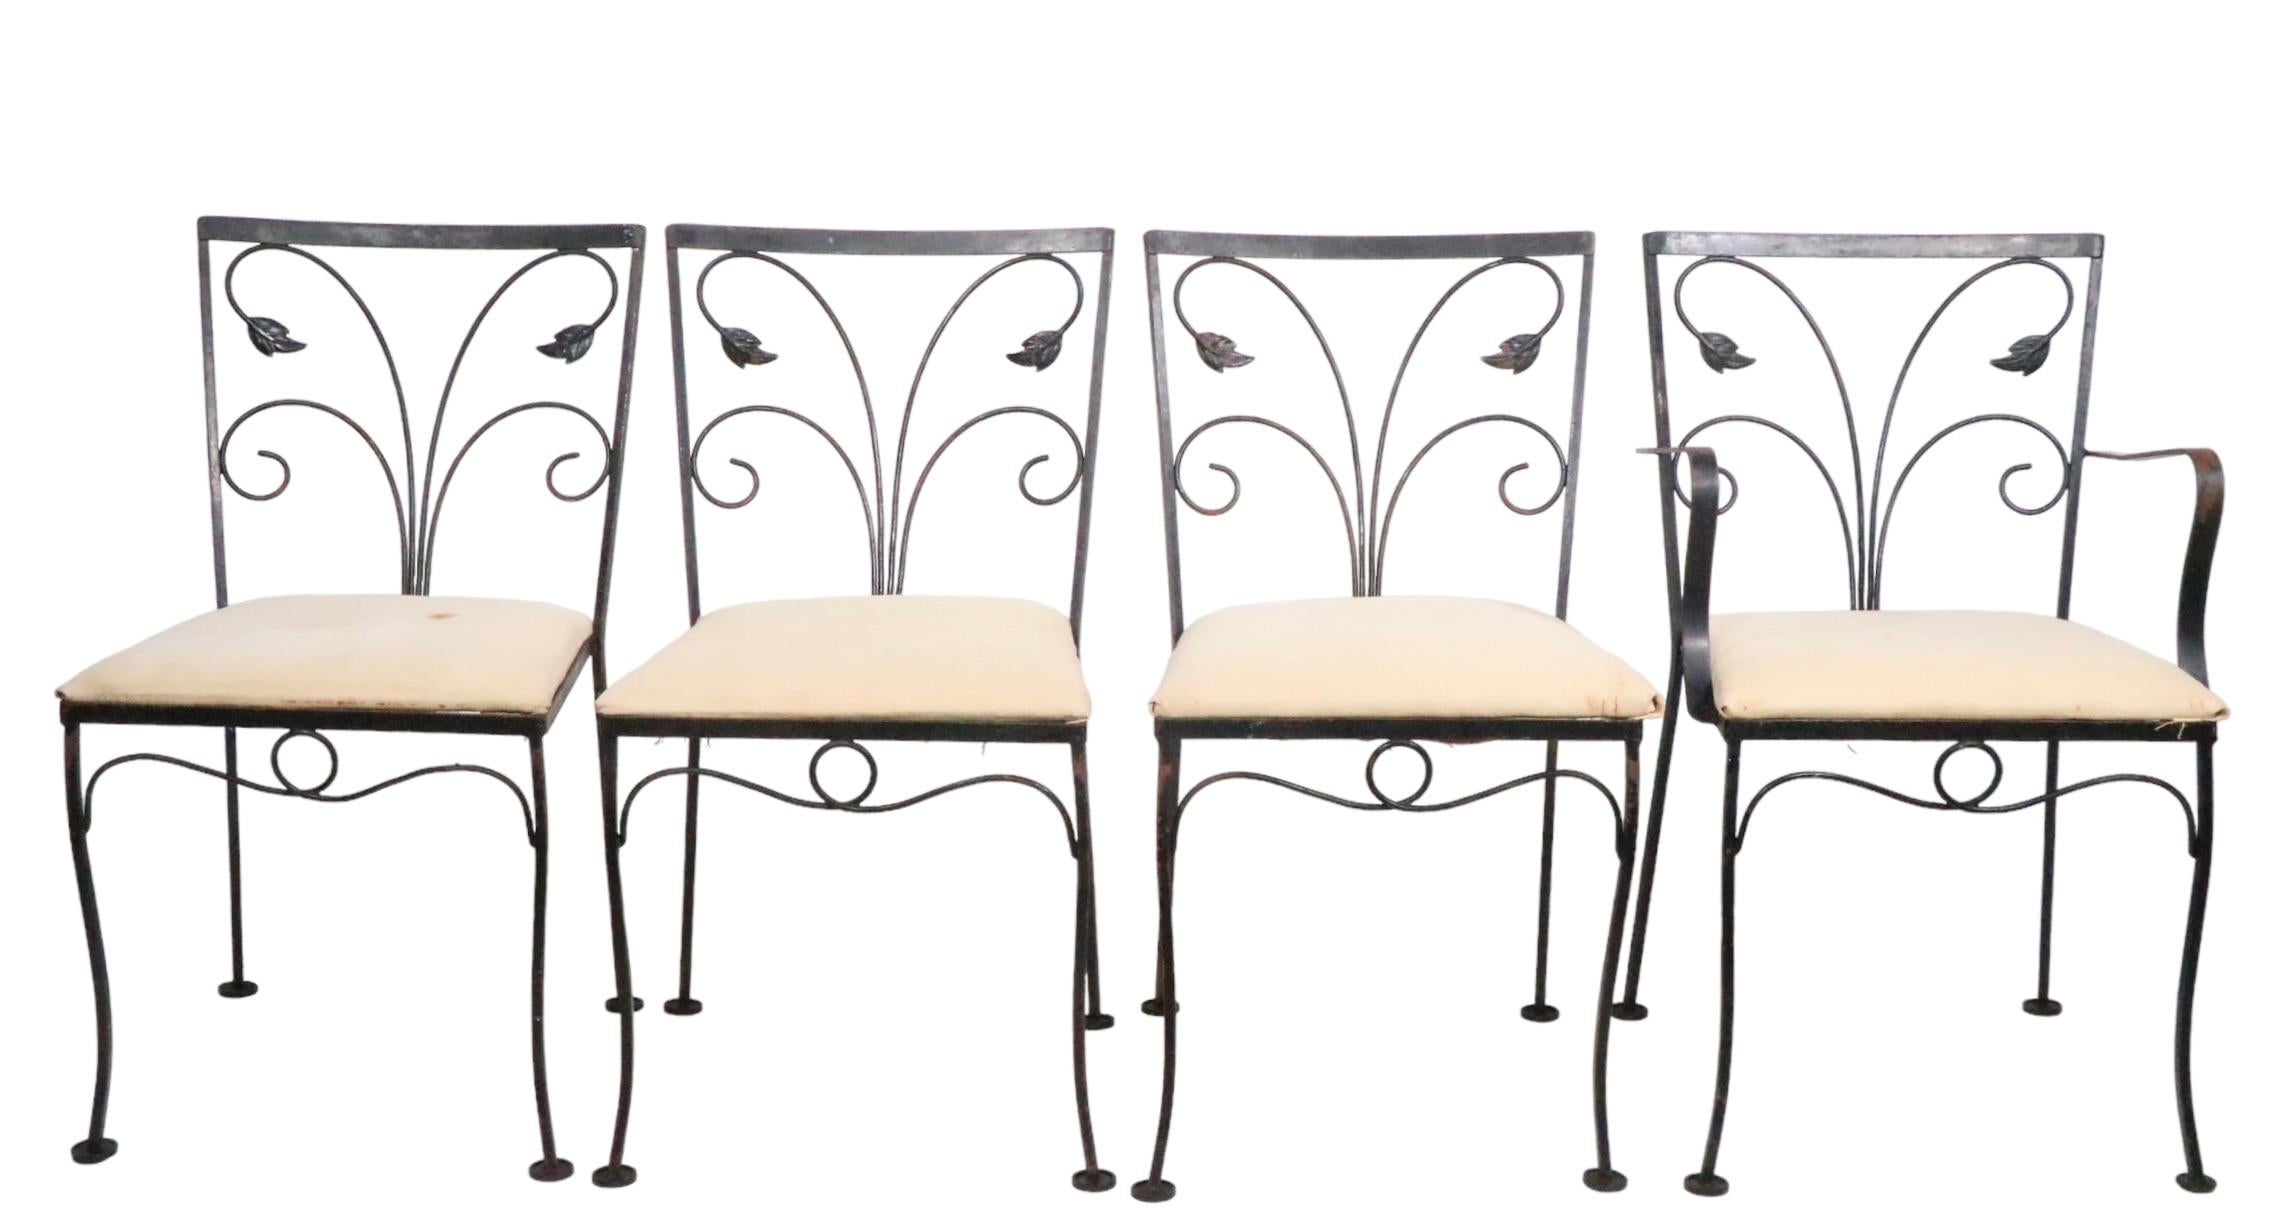 5pc. Wrought Iron and Glass Garden Patio Set att. to Salterini For Sale 8